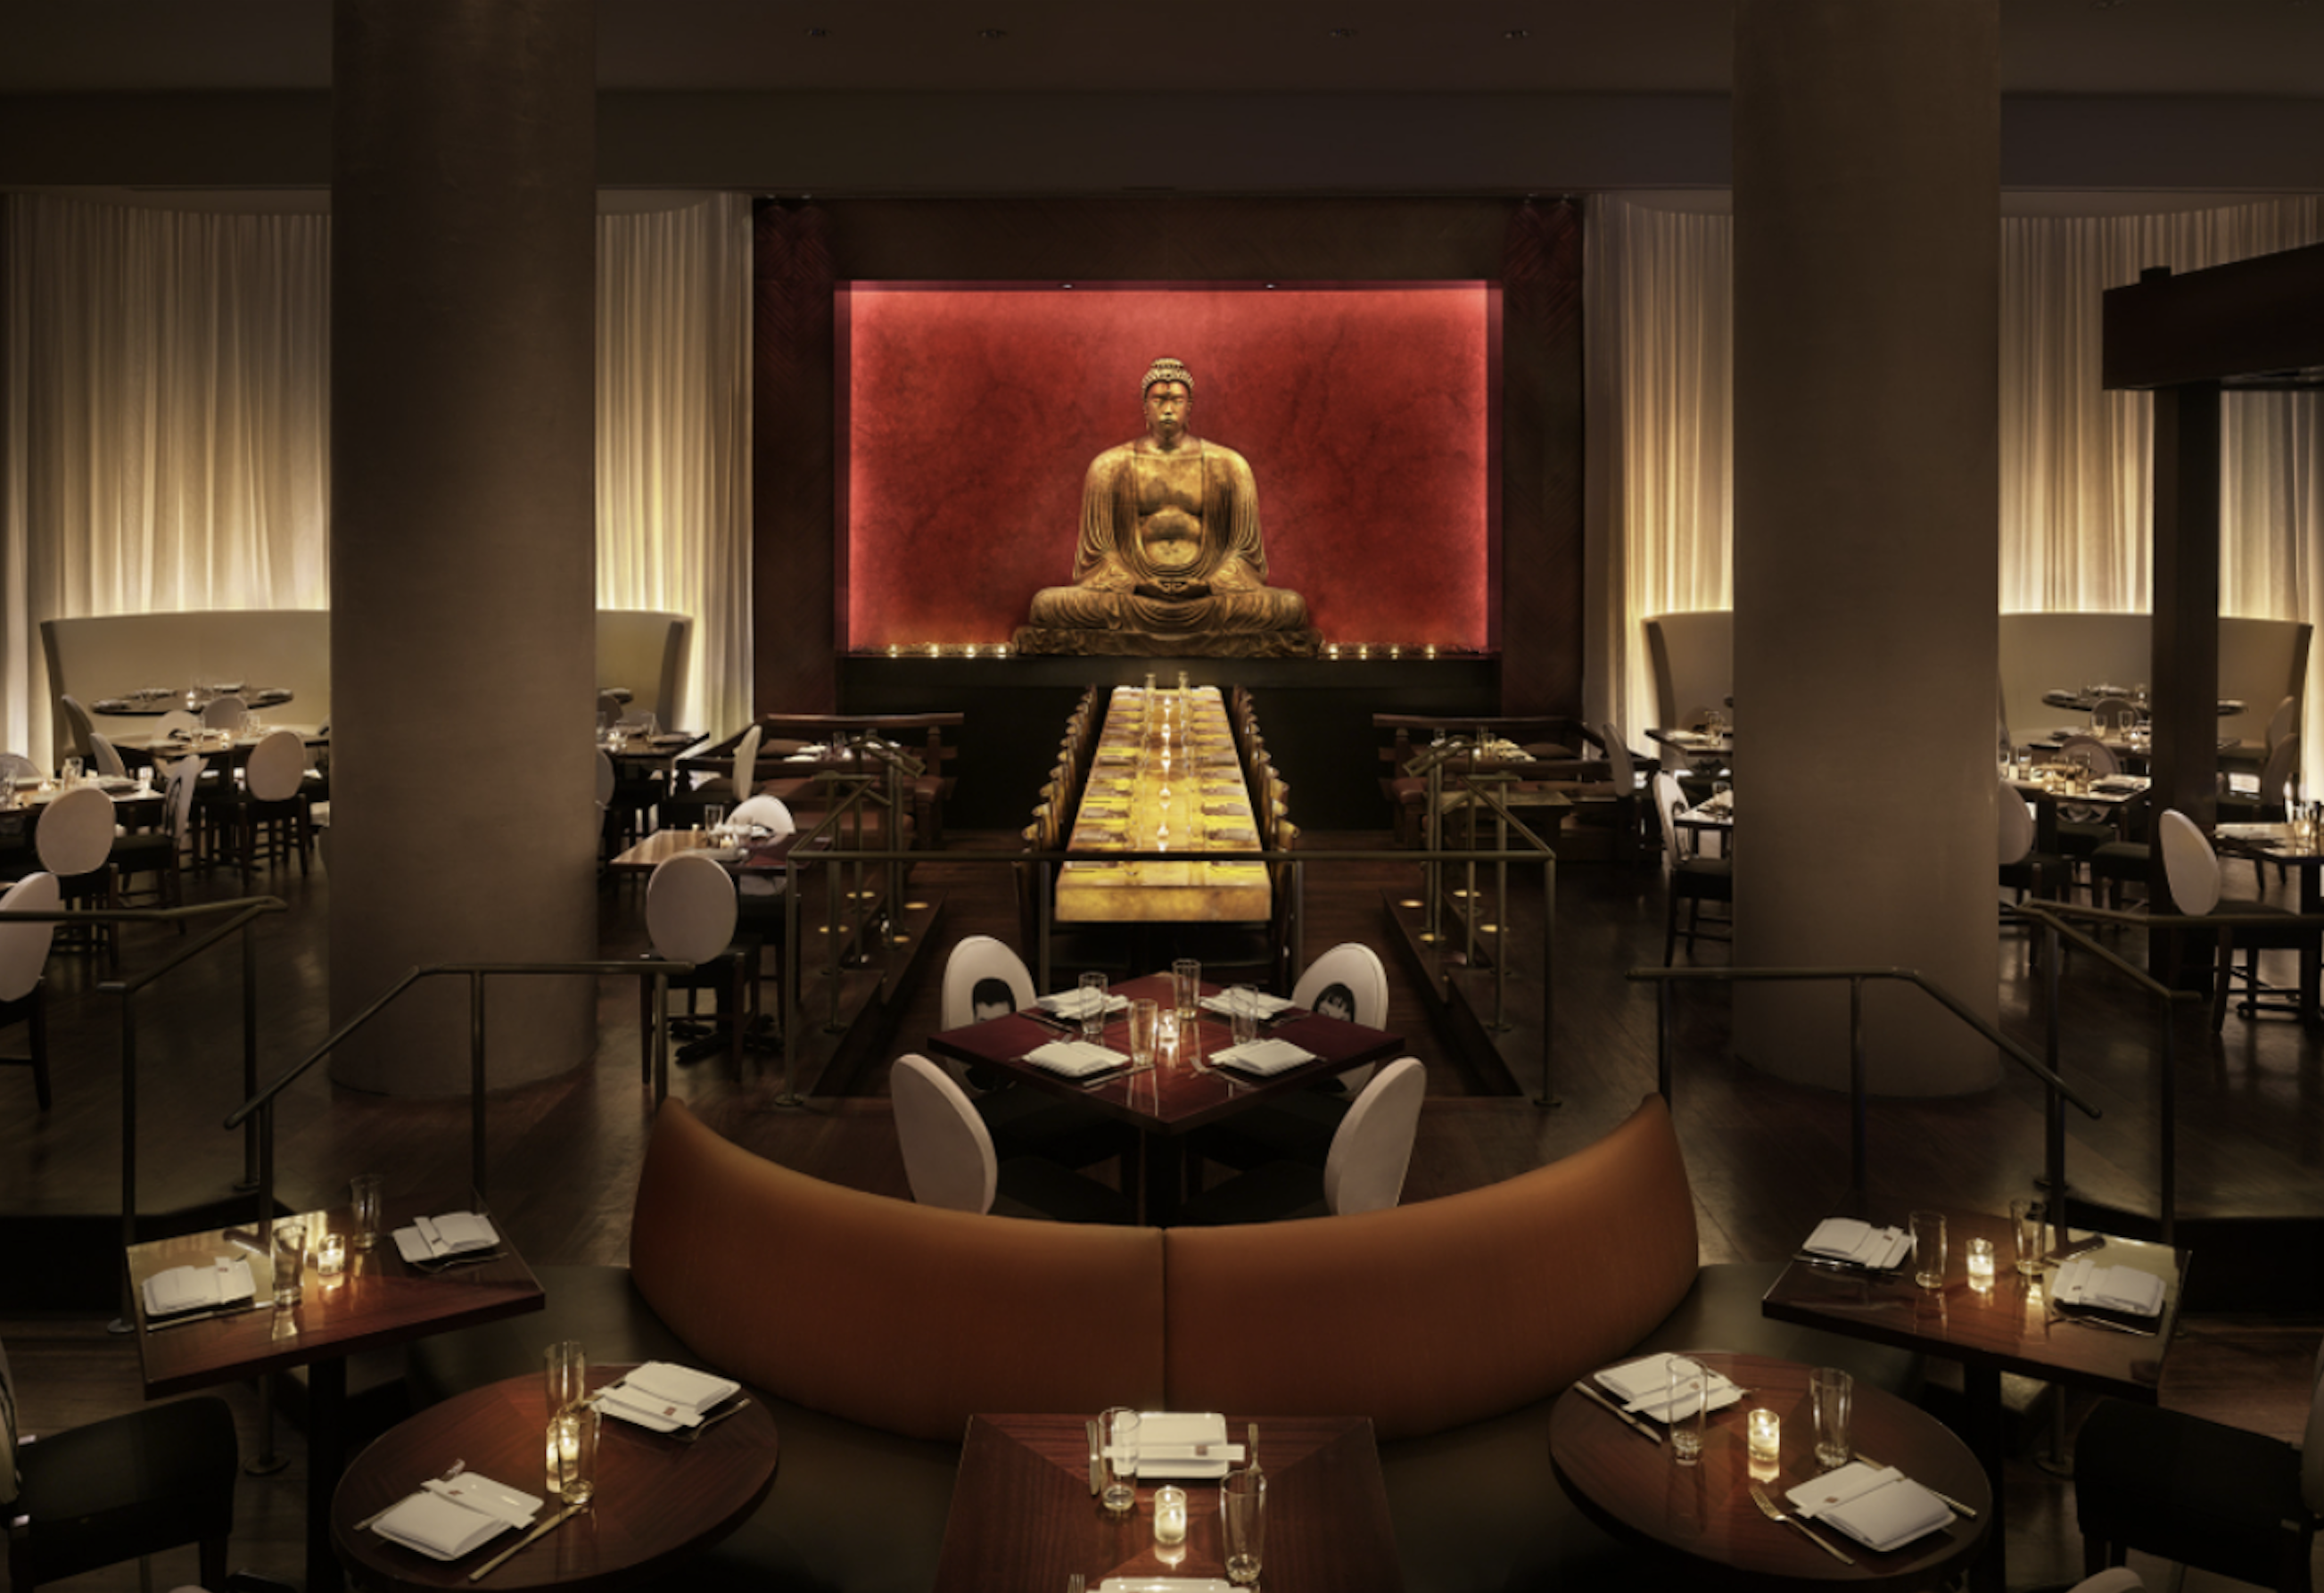 A wide shot of a dimly lit dining room with a golden statue of Buddha in the center. 